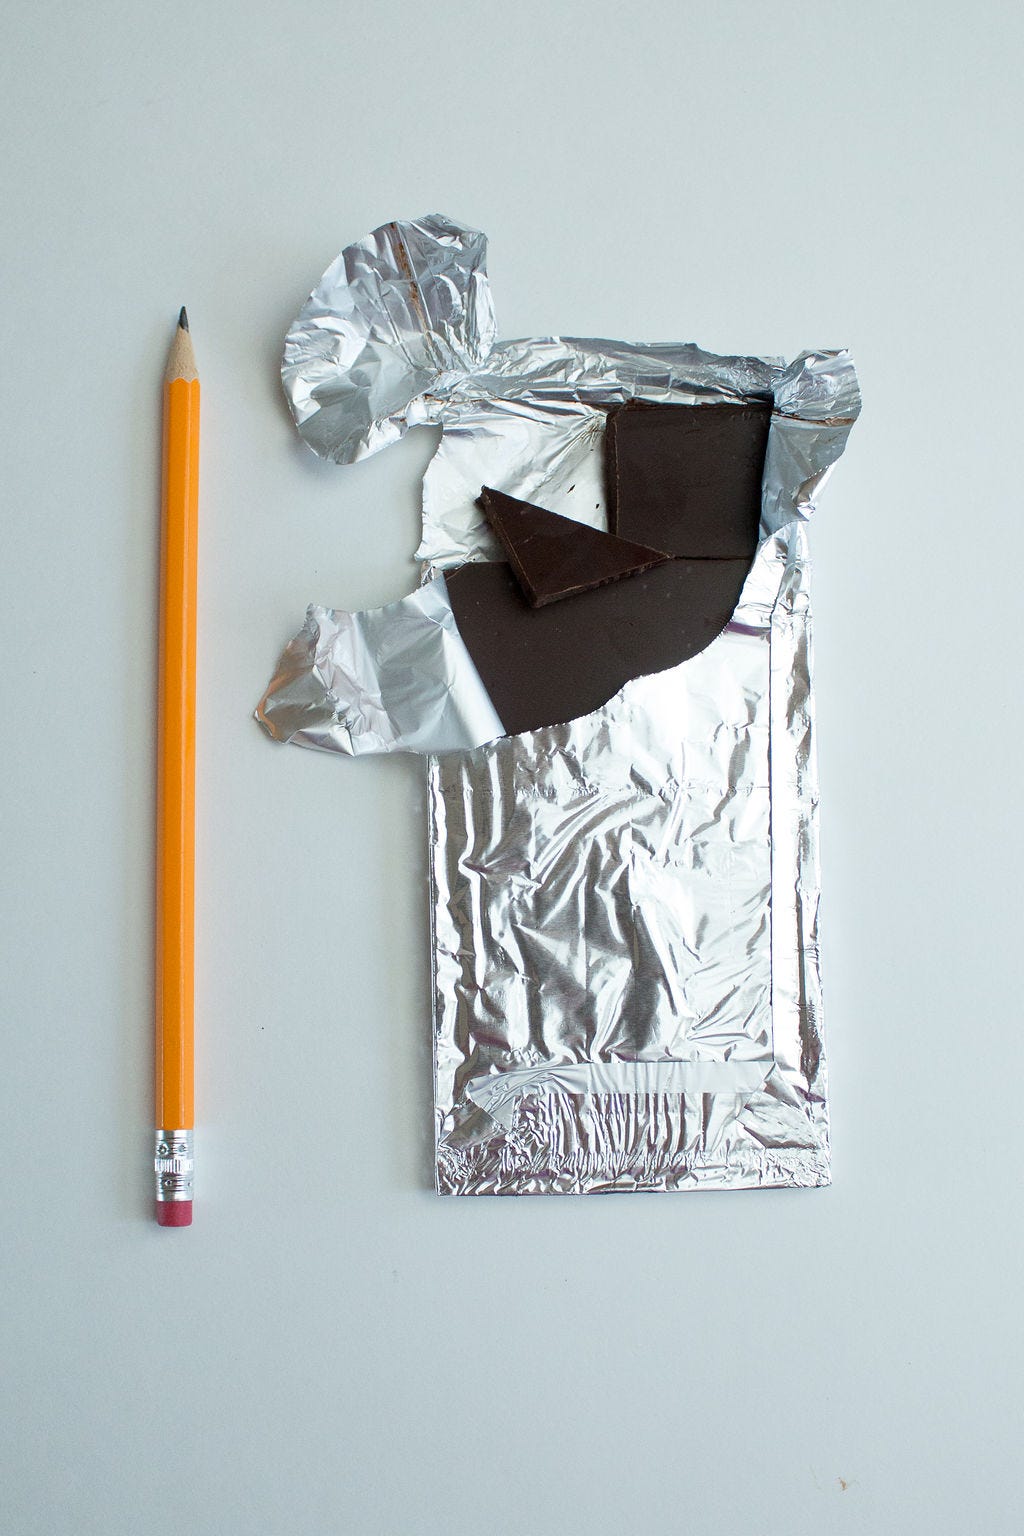 Dark chocolate broken into chunks in a silver wrapper next to a pencil